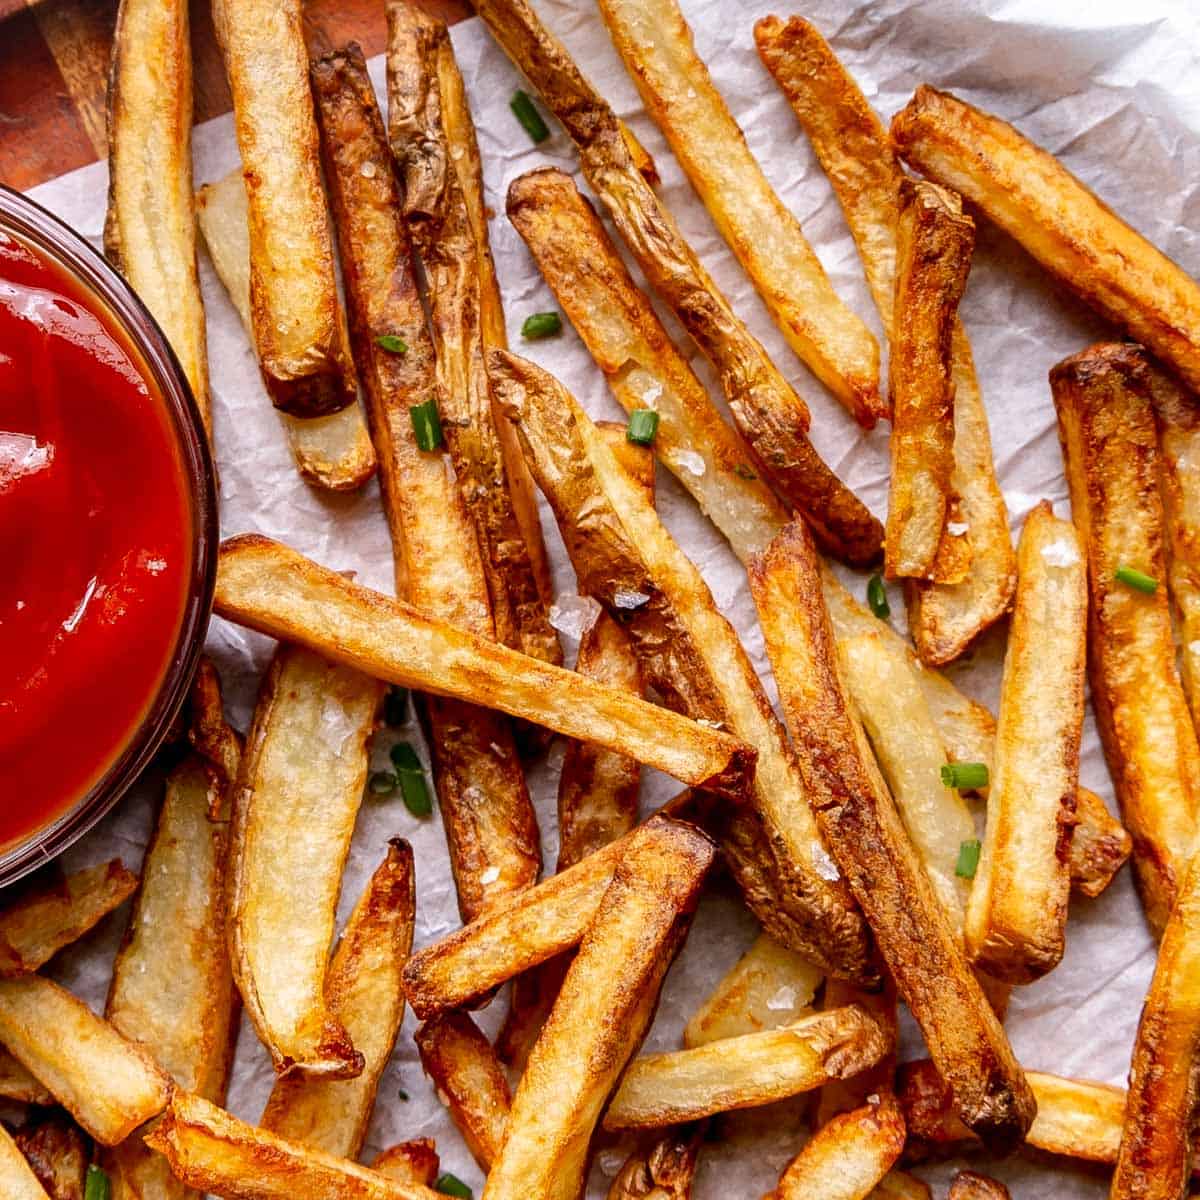 Close up of french fries with ketchup.